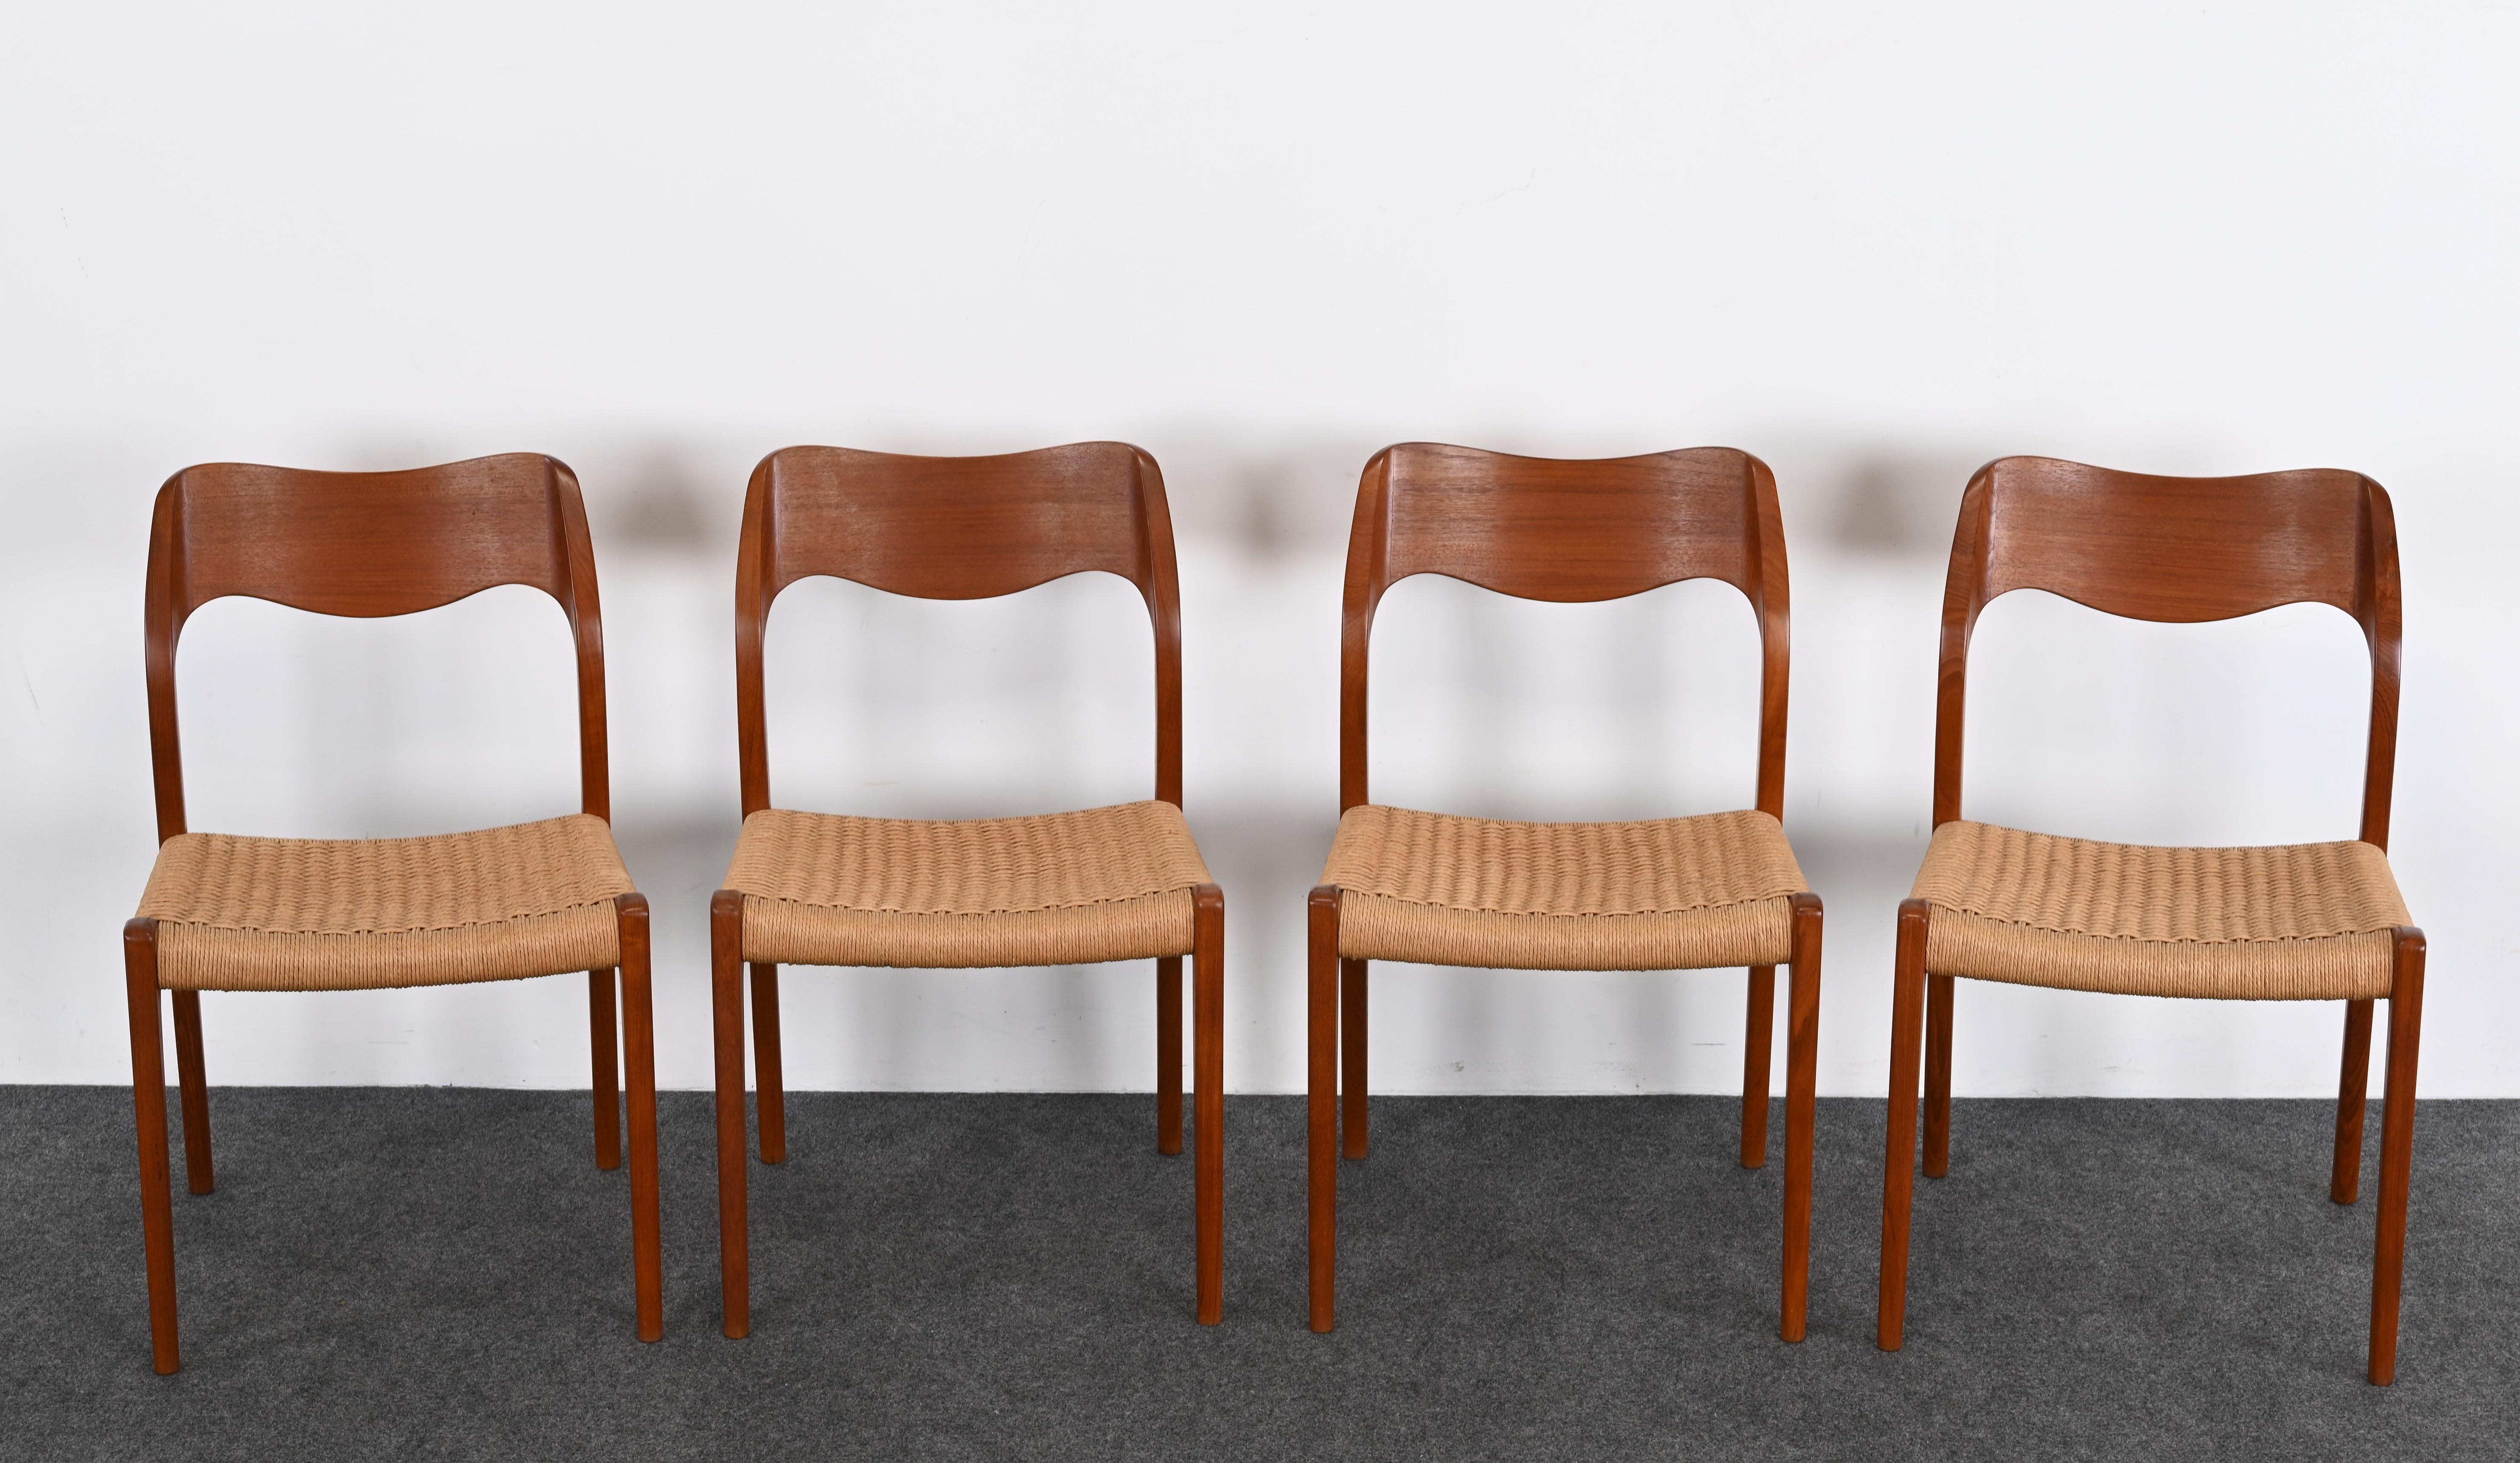 Mid-20th Century Set of Four Danish Modern Dining Chairs Model 71 for Niels Otto Moller, 1960s